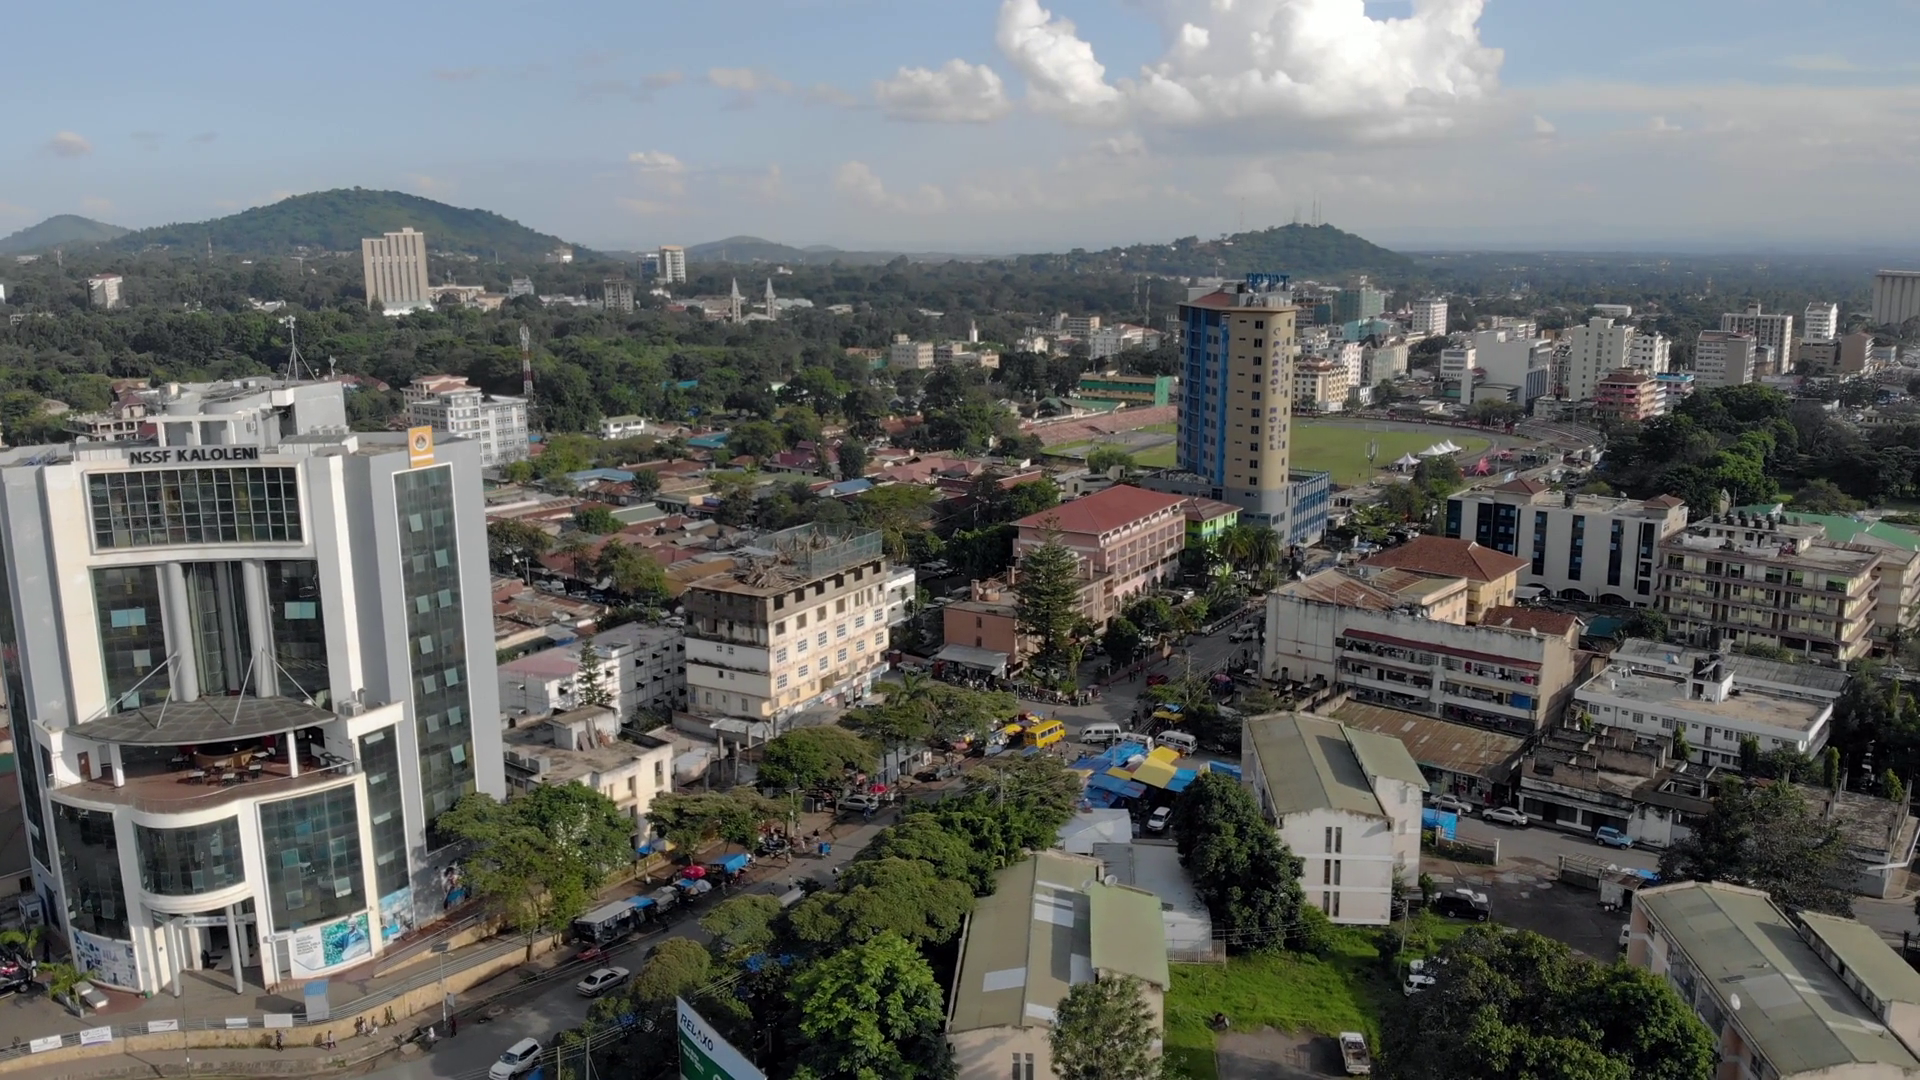 videoblocks-aerial-close-flyby-view-of-the-city-of-arusha-tanzania-mountains-and-volcano-on-background_hfrhol4gp_thumbnail-1080_01